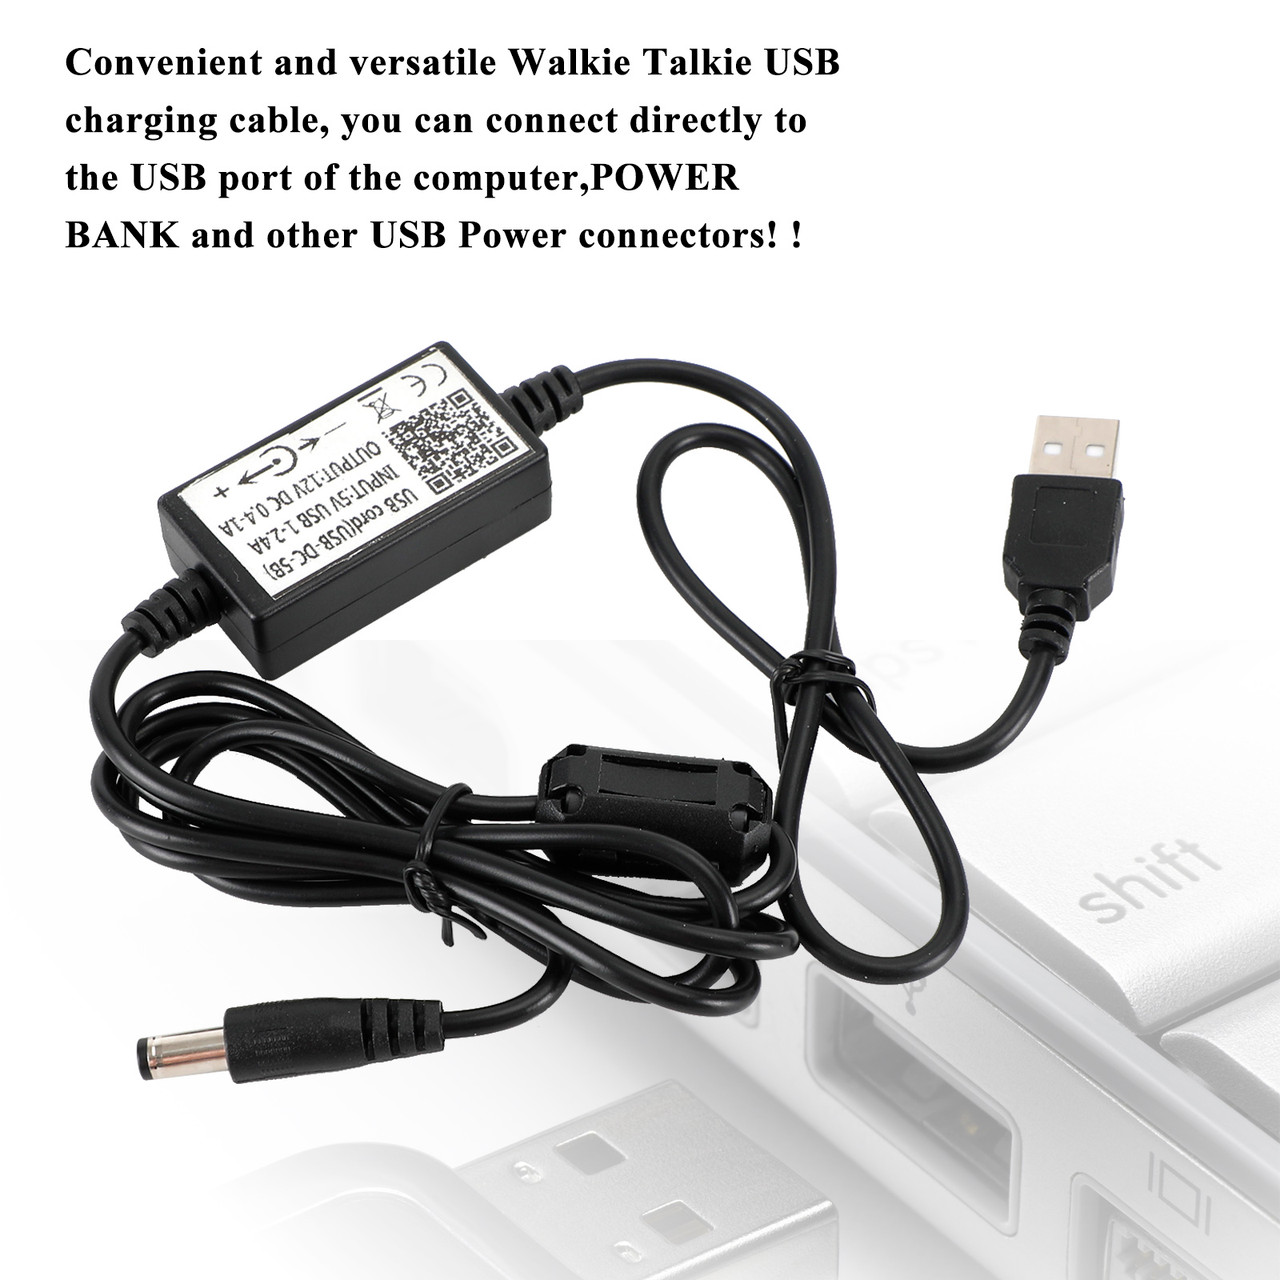 USB-DC-5B Cable Charger For ICOM F21/V8 Battery Charger For Walkie Talkie